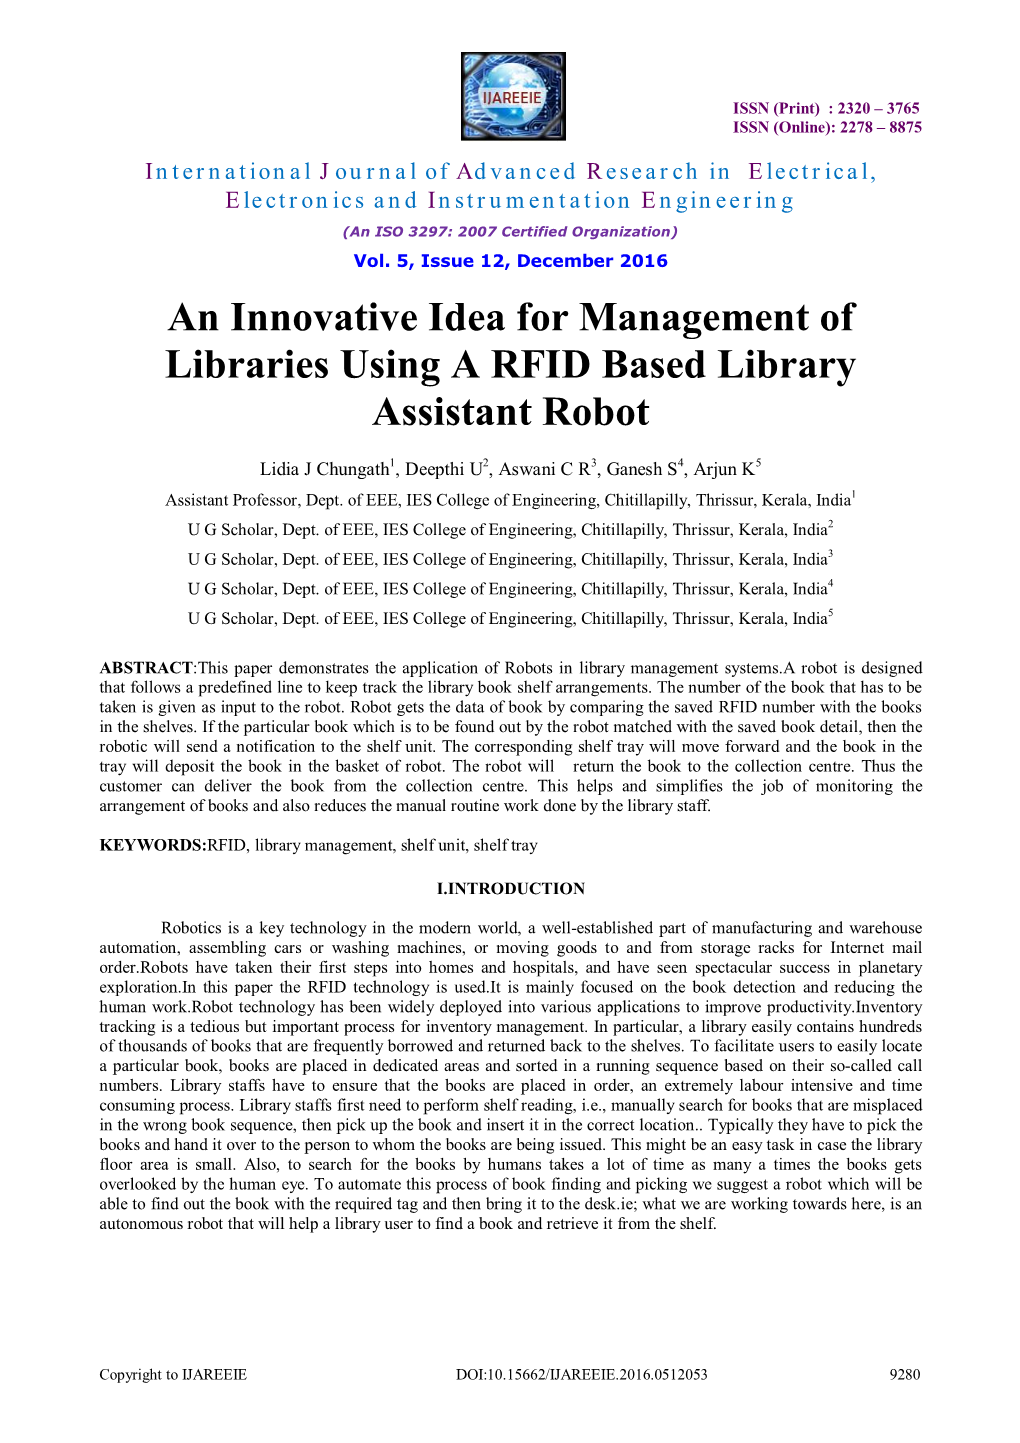 An Innovative Idea for Management of Libraries Using a RFID Based Library Assistant Robot